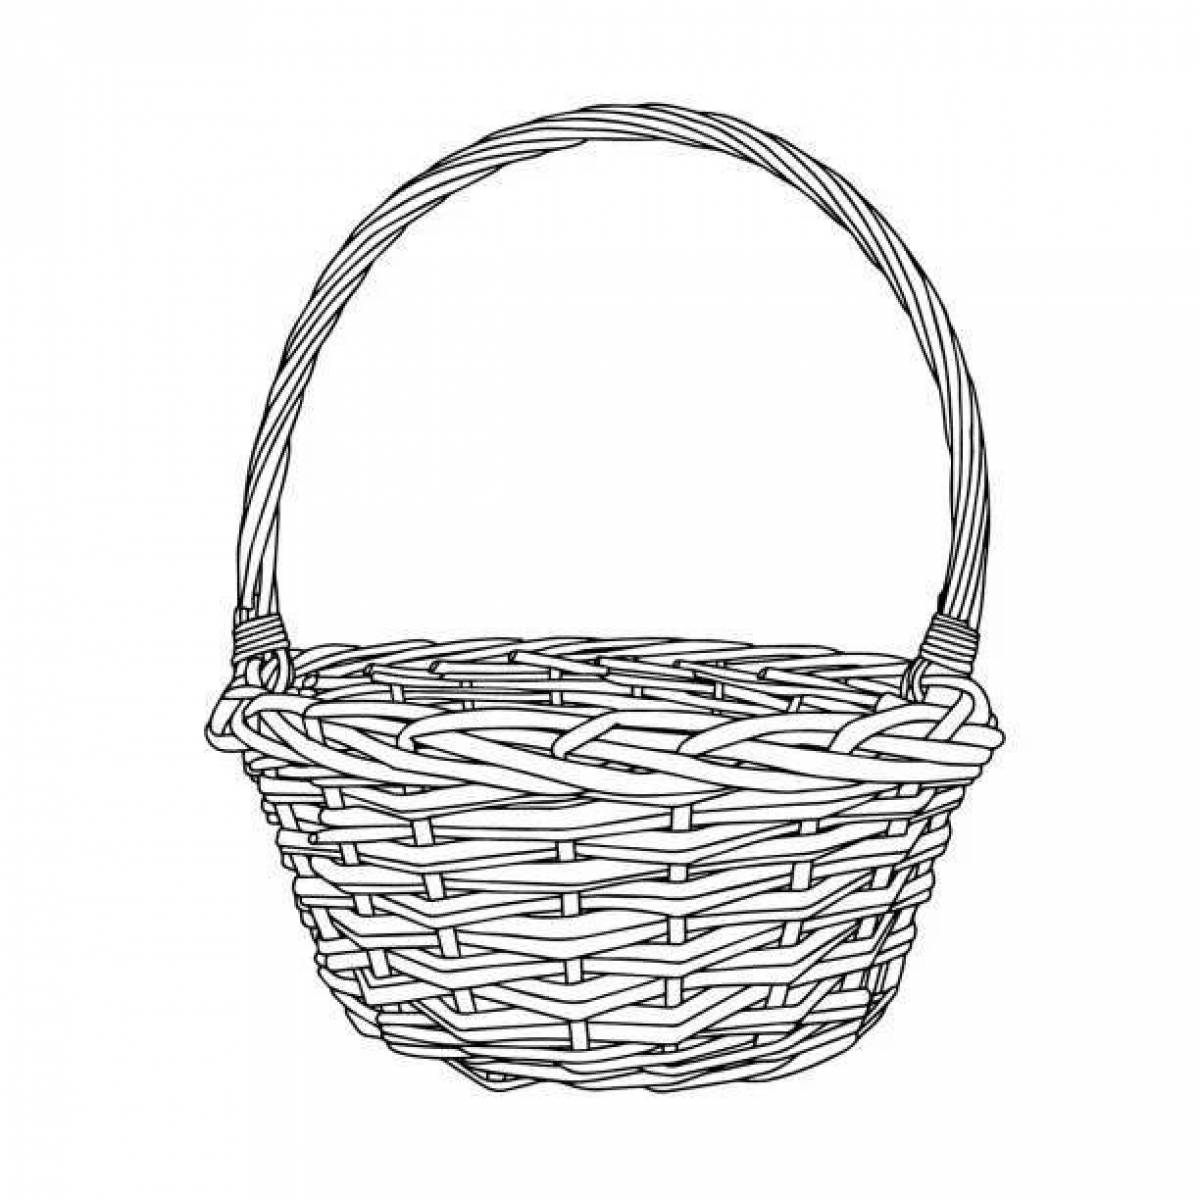 Coloring page shimmery baby basket